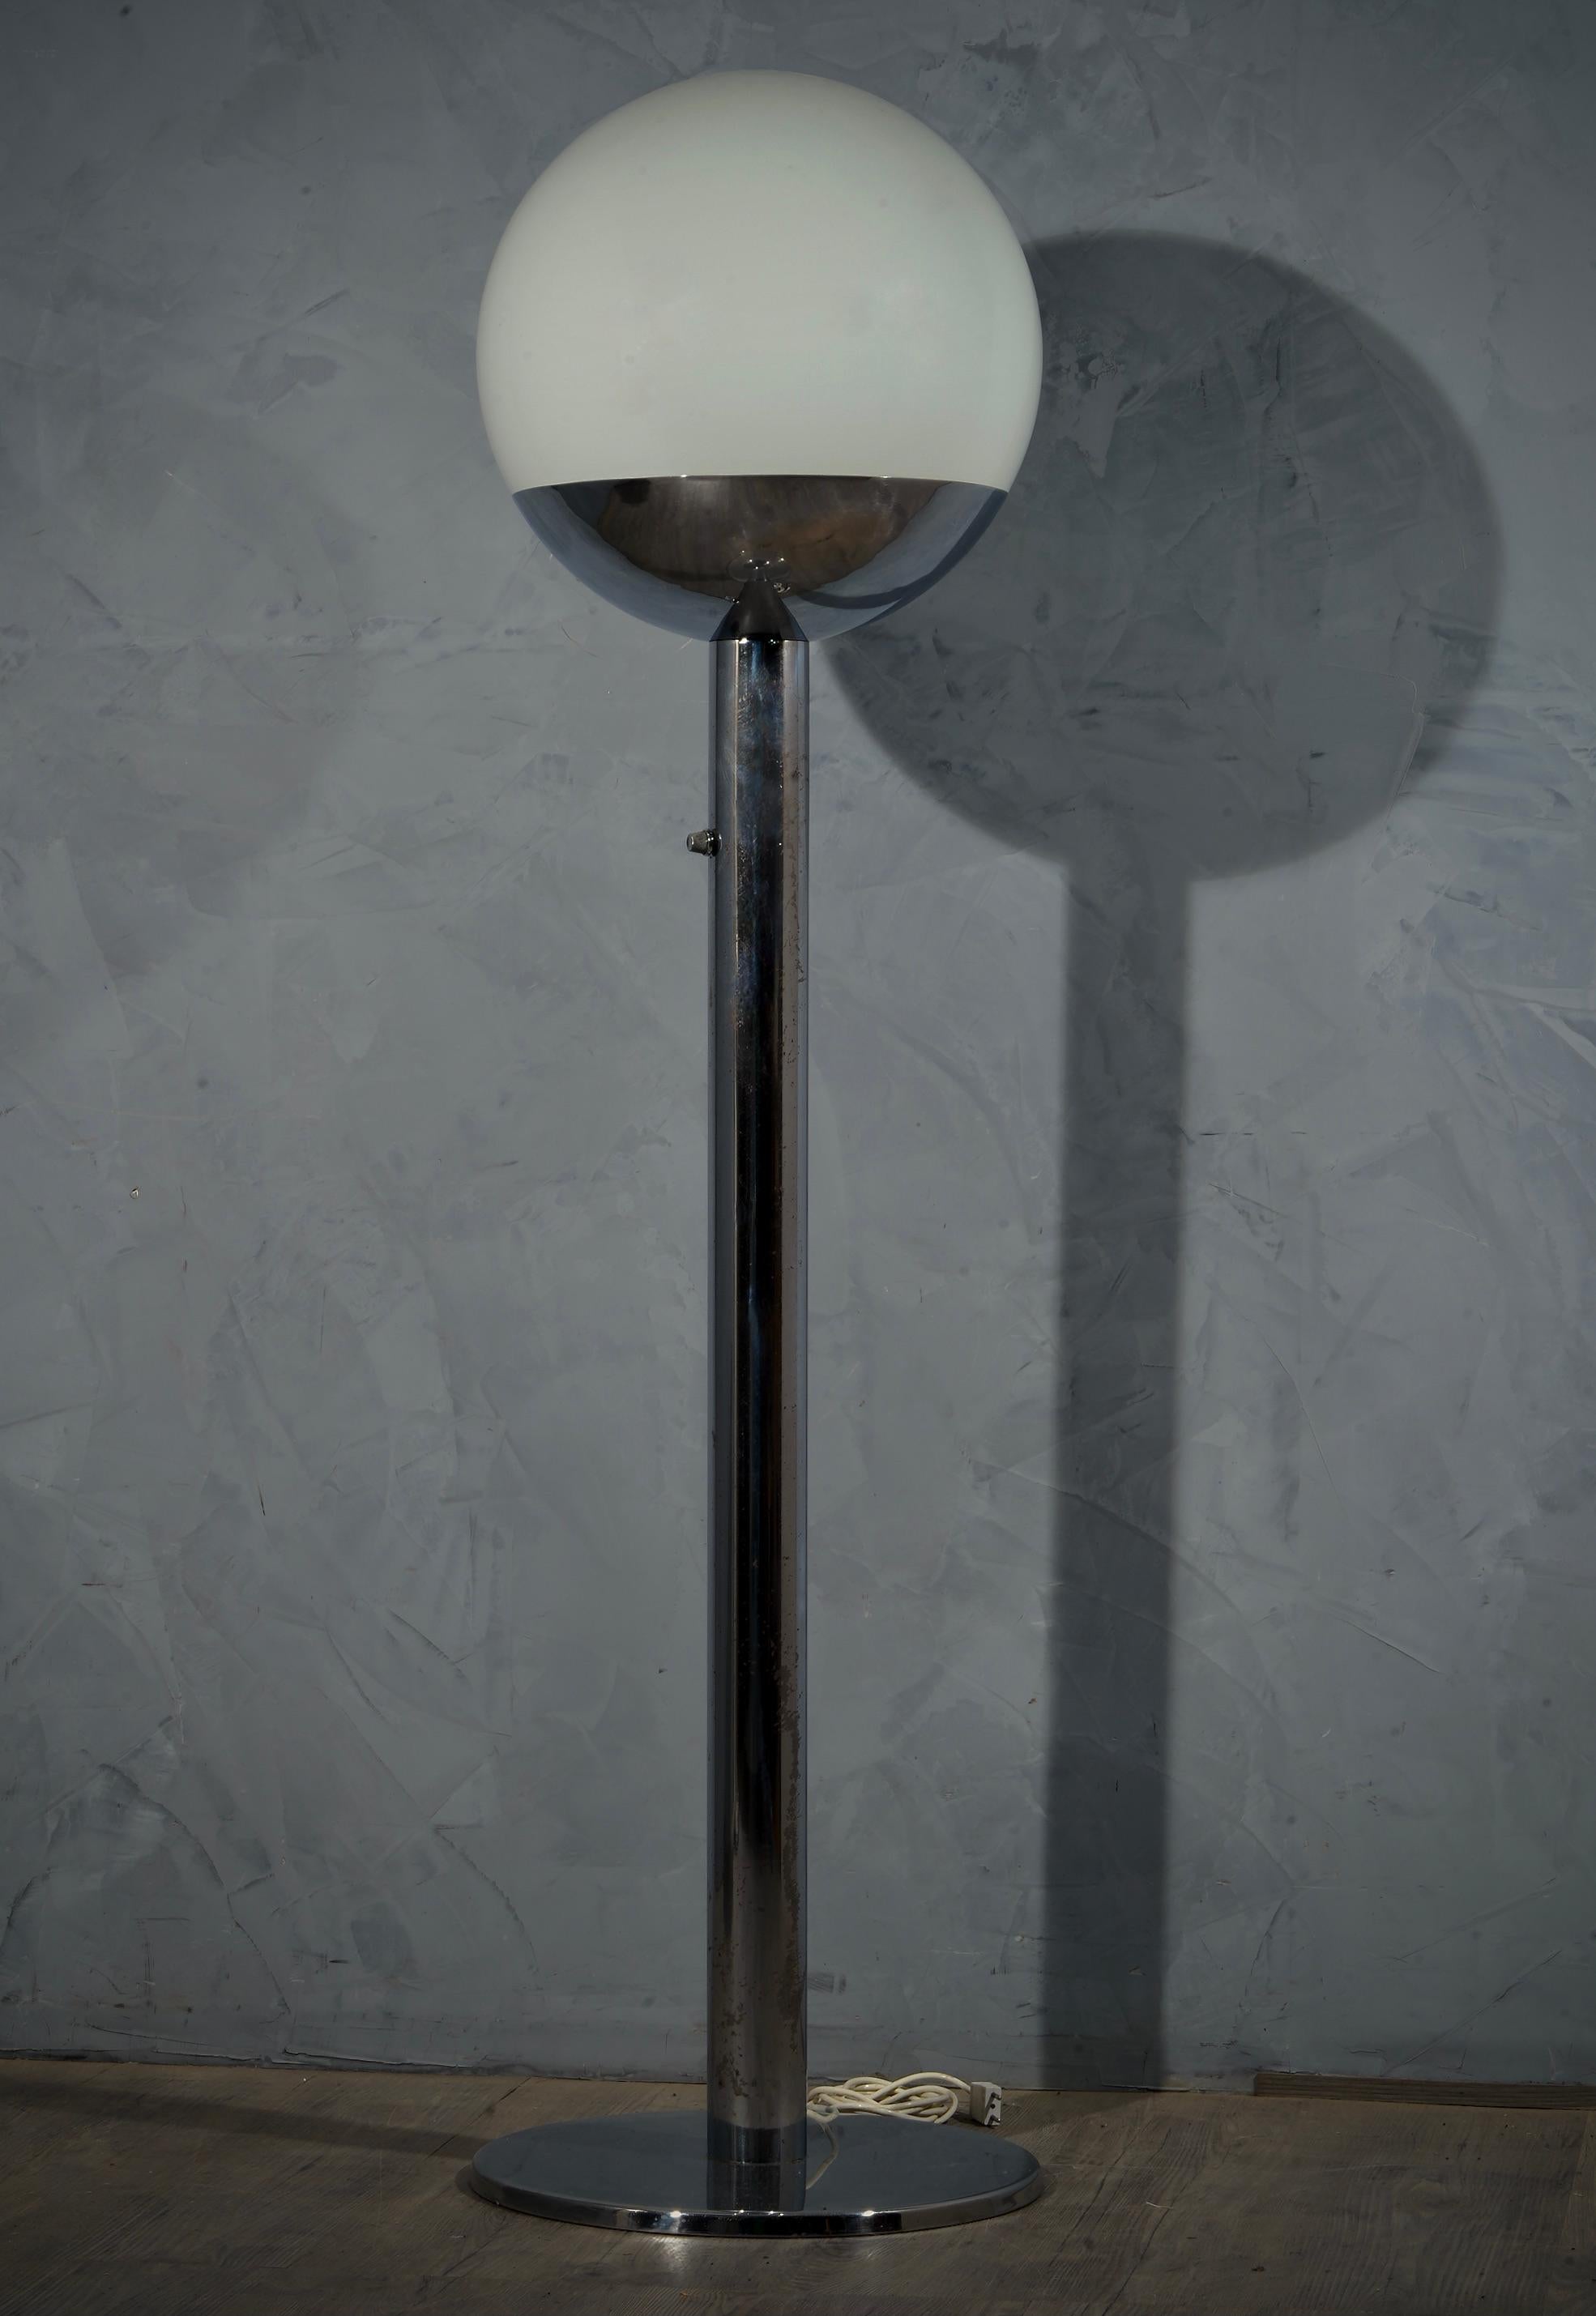 Art Glass Pia Guidetti Crippa for Luci Glass and Chrome Italian Floor Lamp, 1970 For Sale